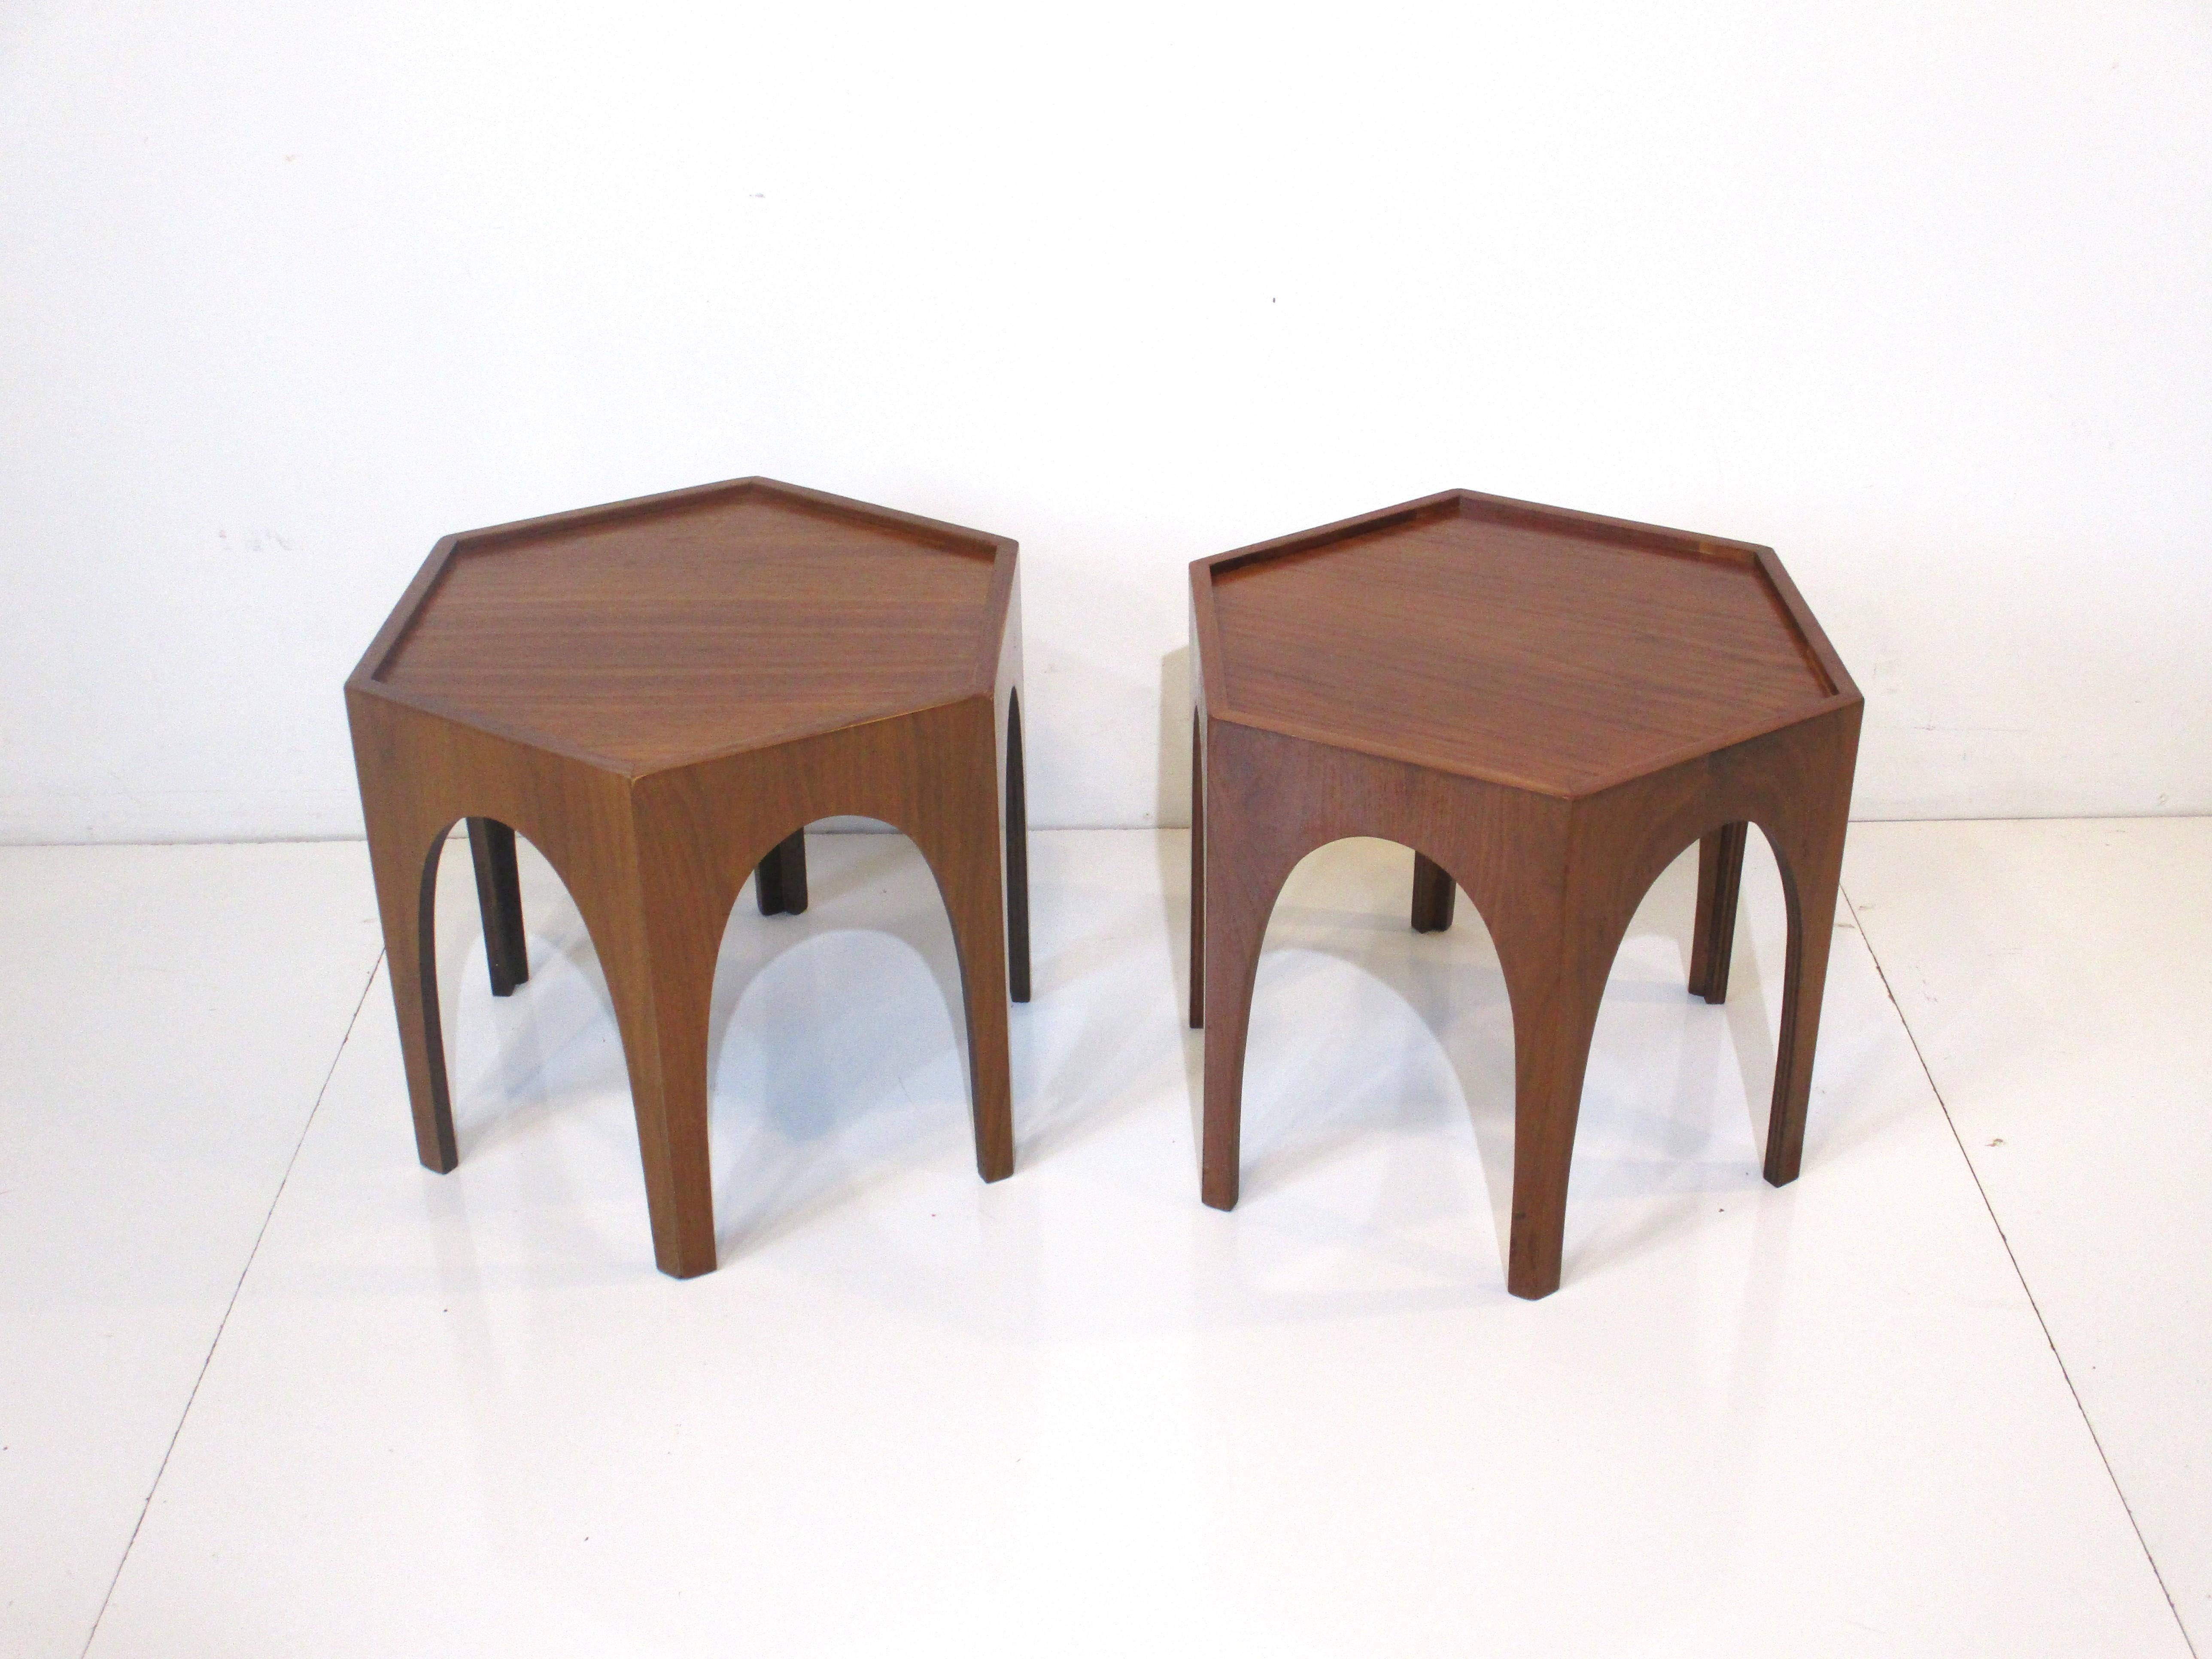 American Mid Century Hexagon Walnut Side Tables in the style of Heritage